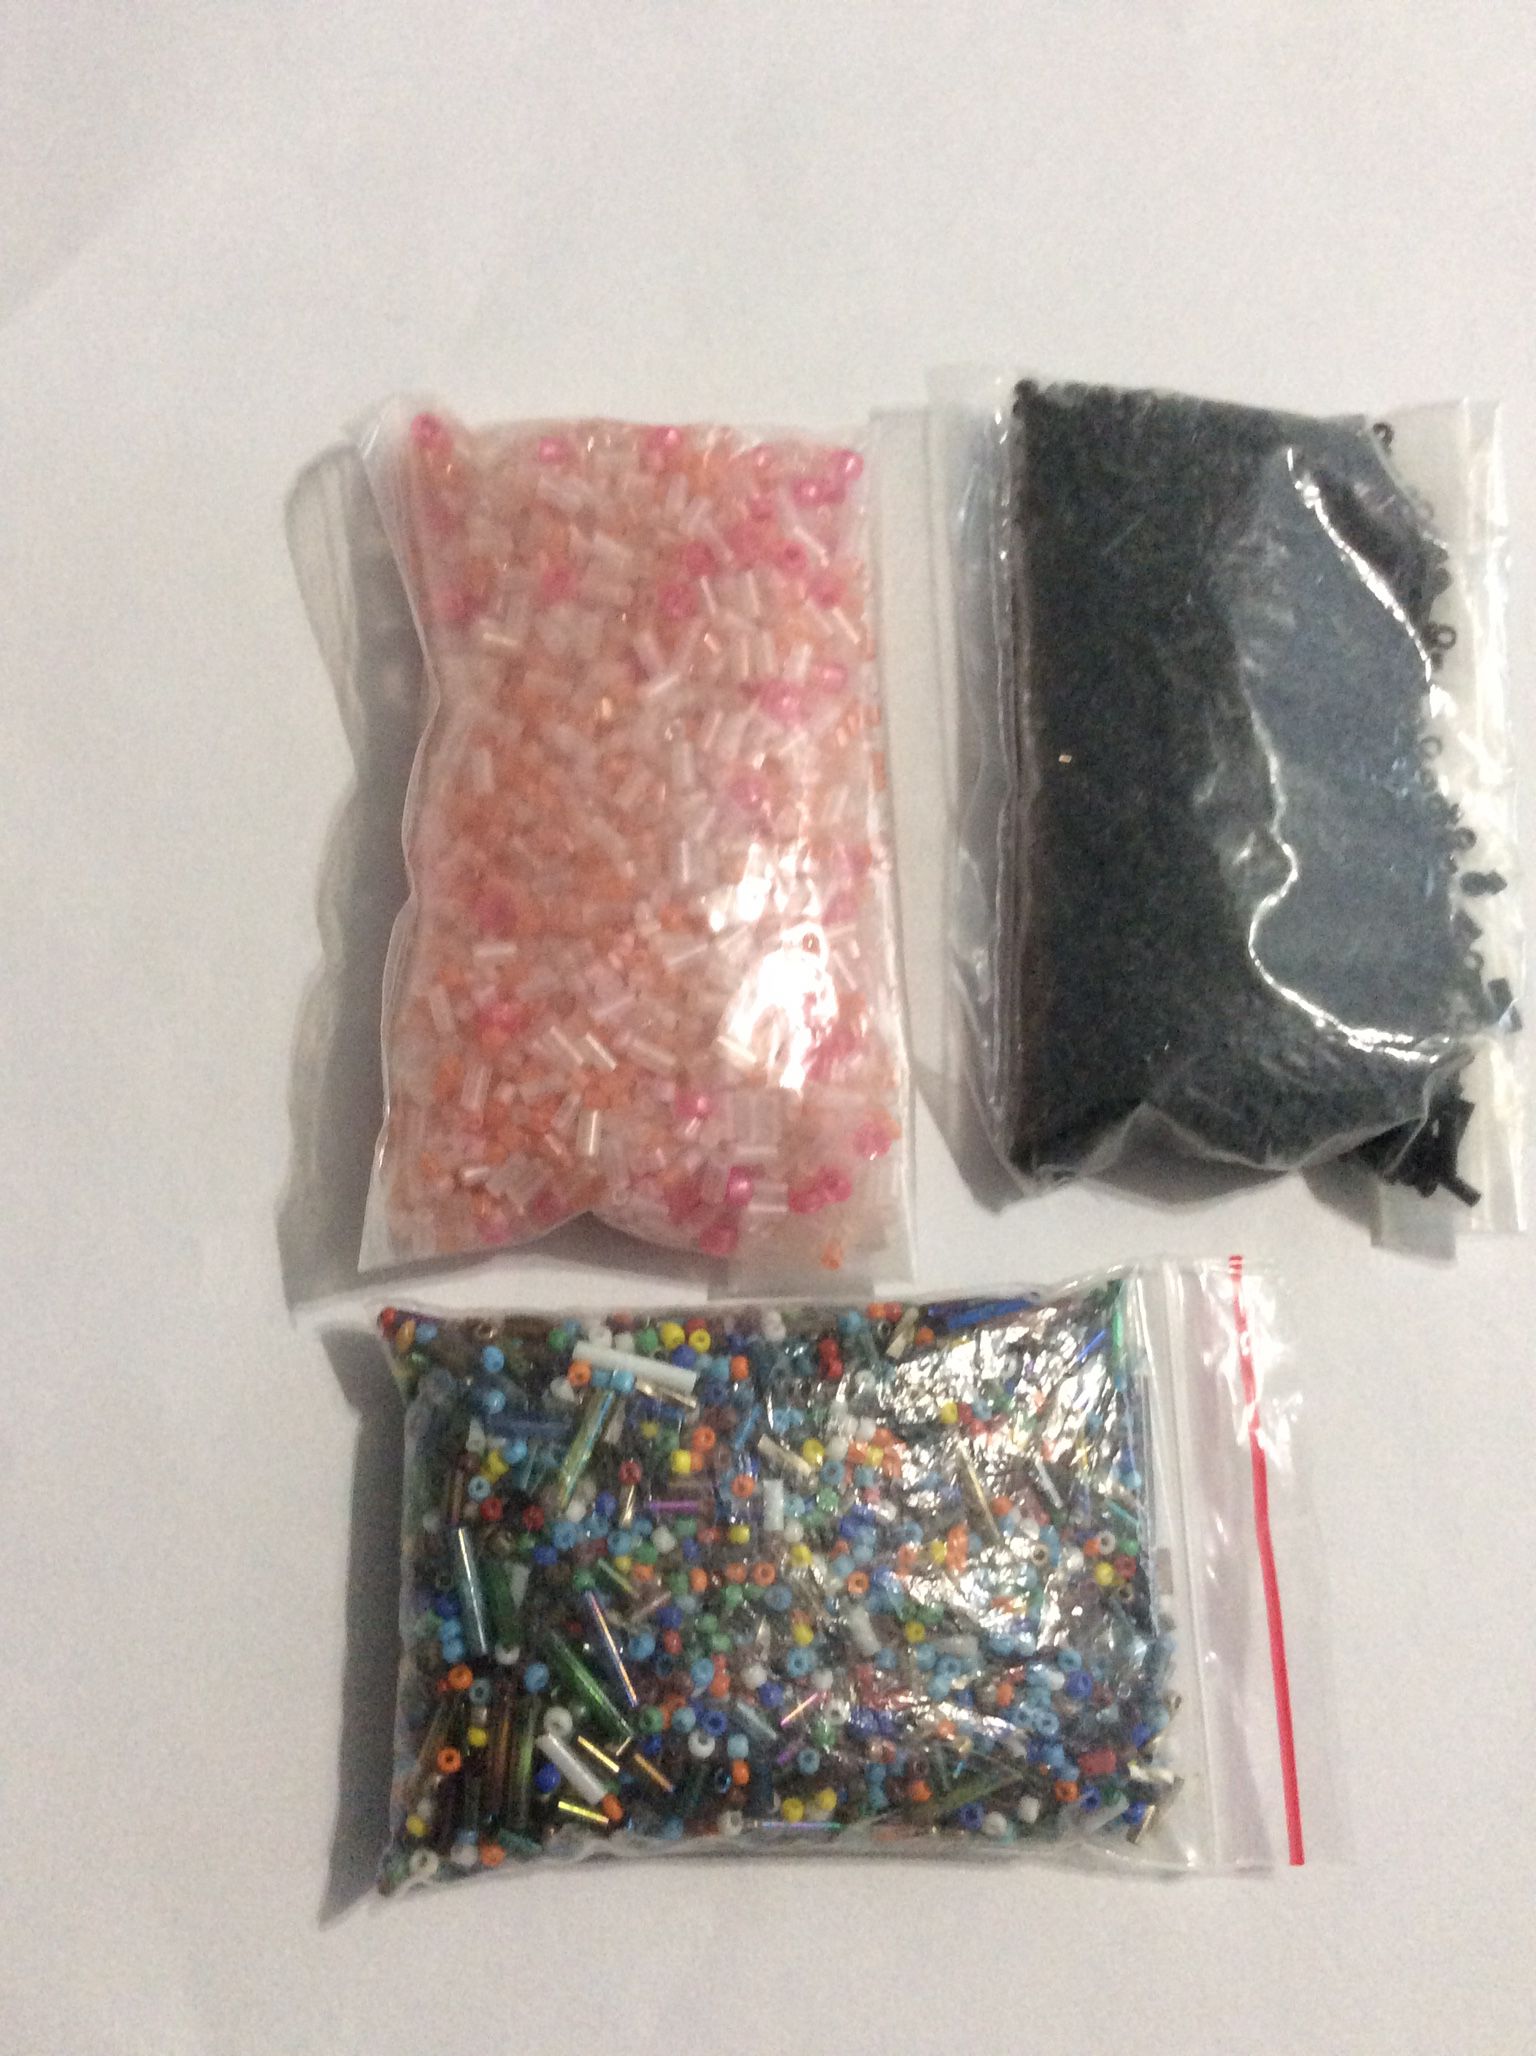 Selling 3 bags of Multi-colored/Multi/size Seed Beads for Crafting and Creating jewelry or where ever your imagination takes you. The beads are multi-